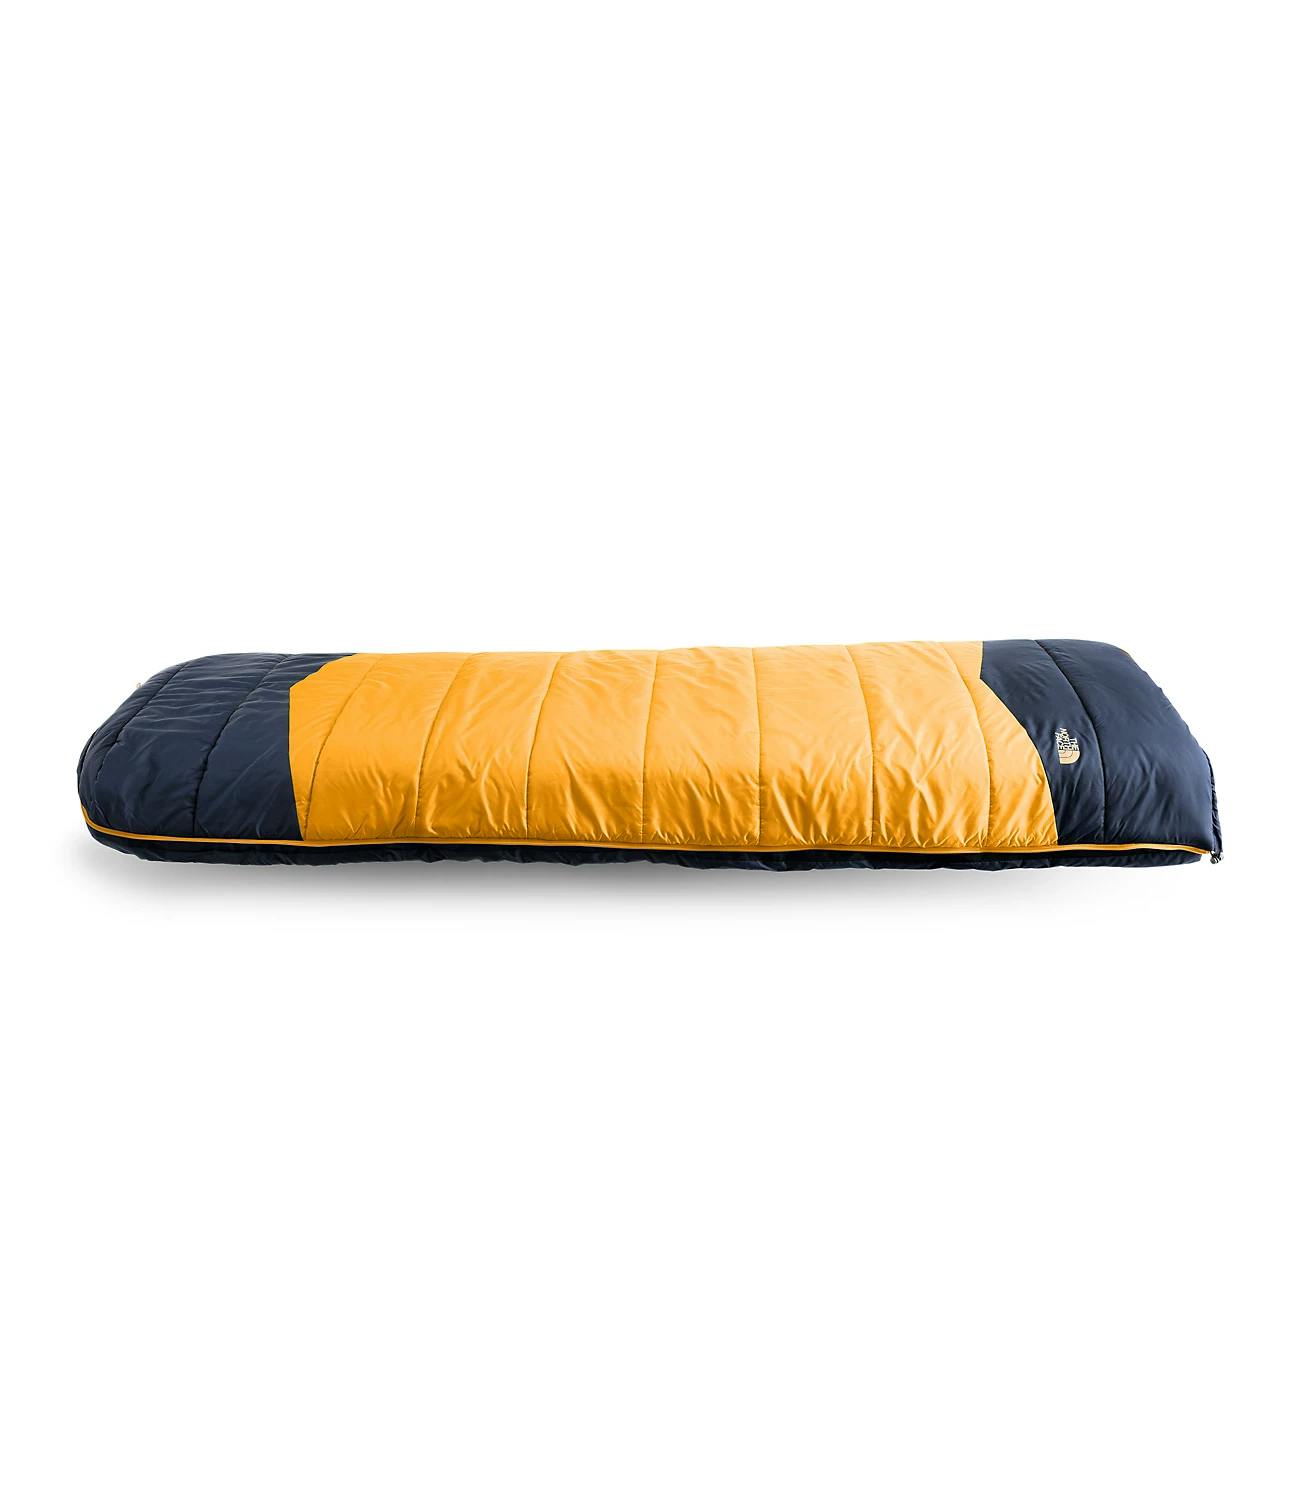 The North Face Dolomite One 15 Sleeping Bag - Men's